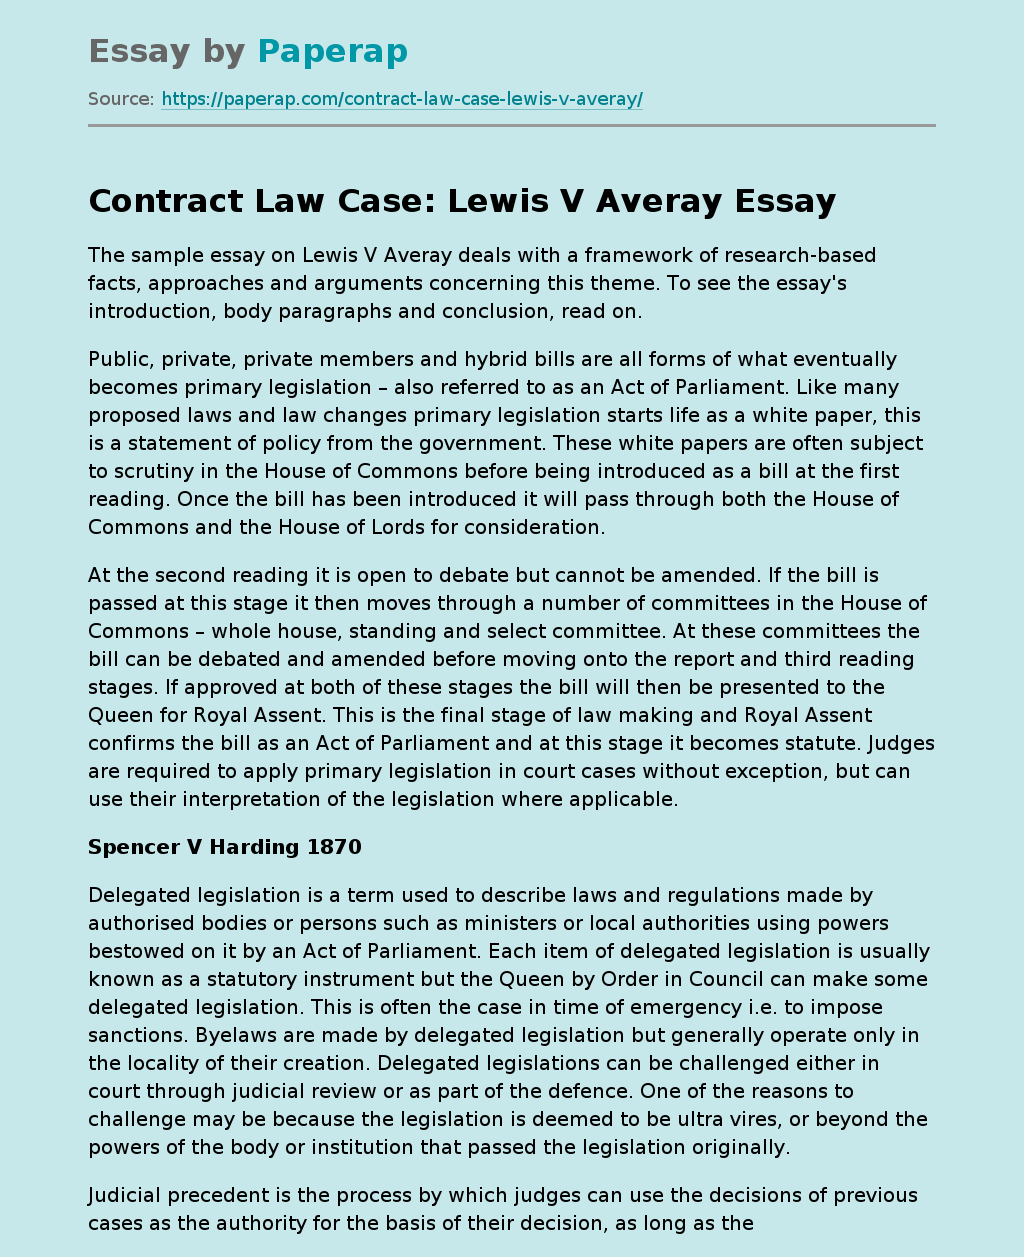 Contract Law Case: Lewis V Averay